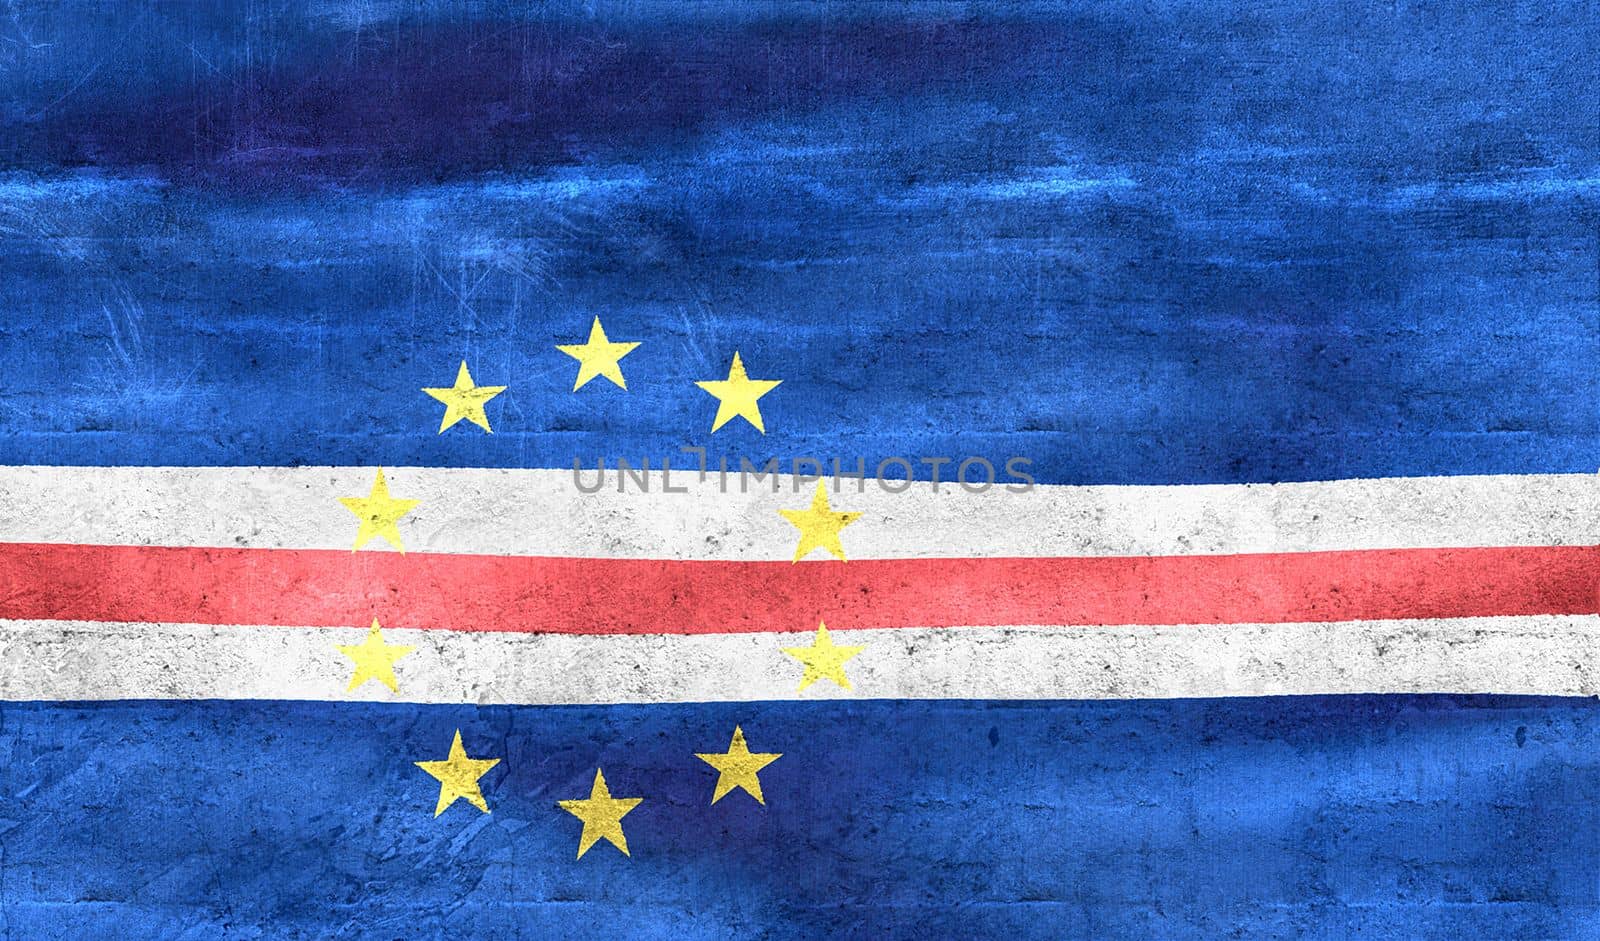 Cabo Verde flag - realistic waving fabric flag by MP_foto71